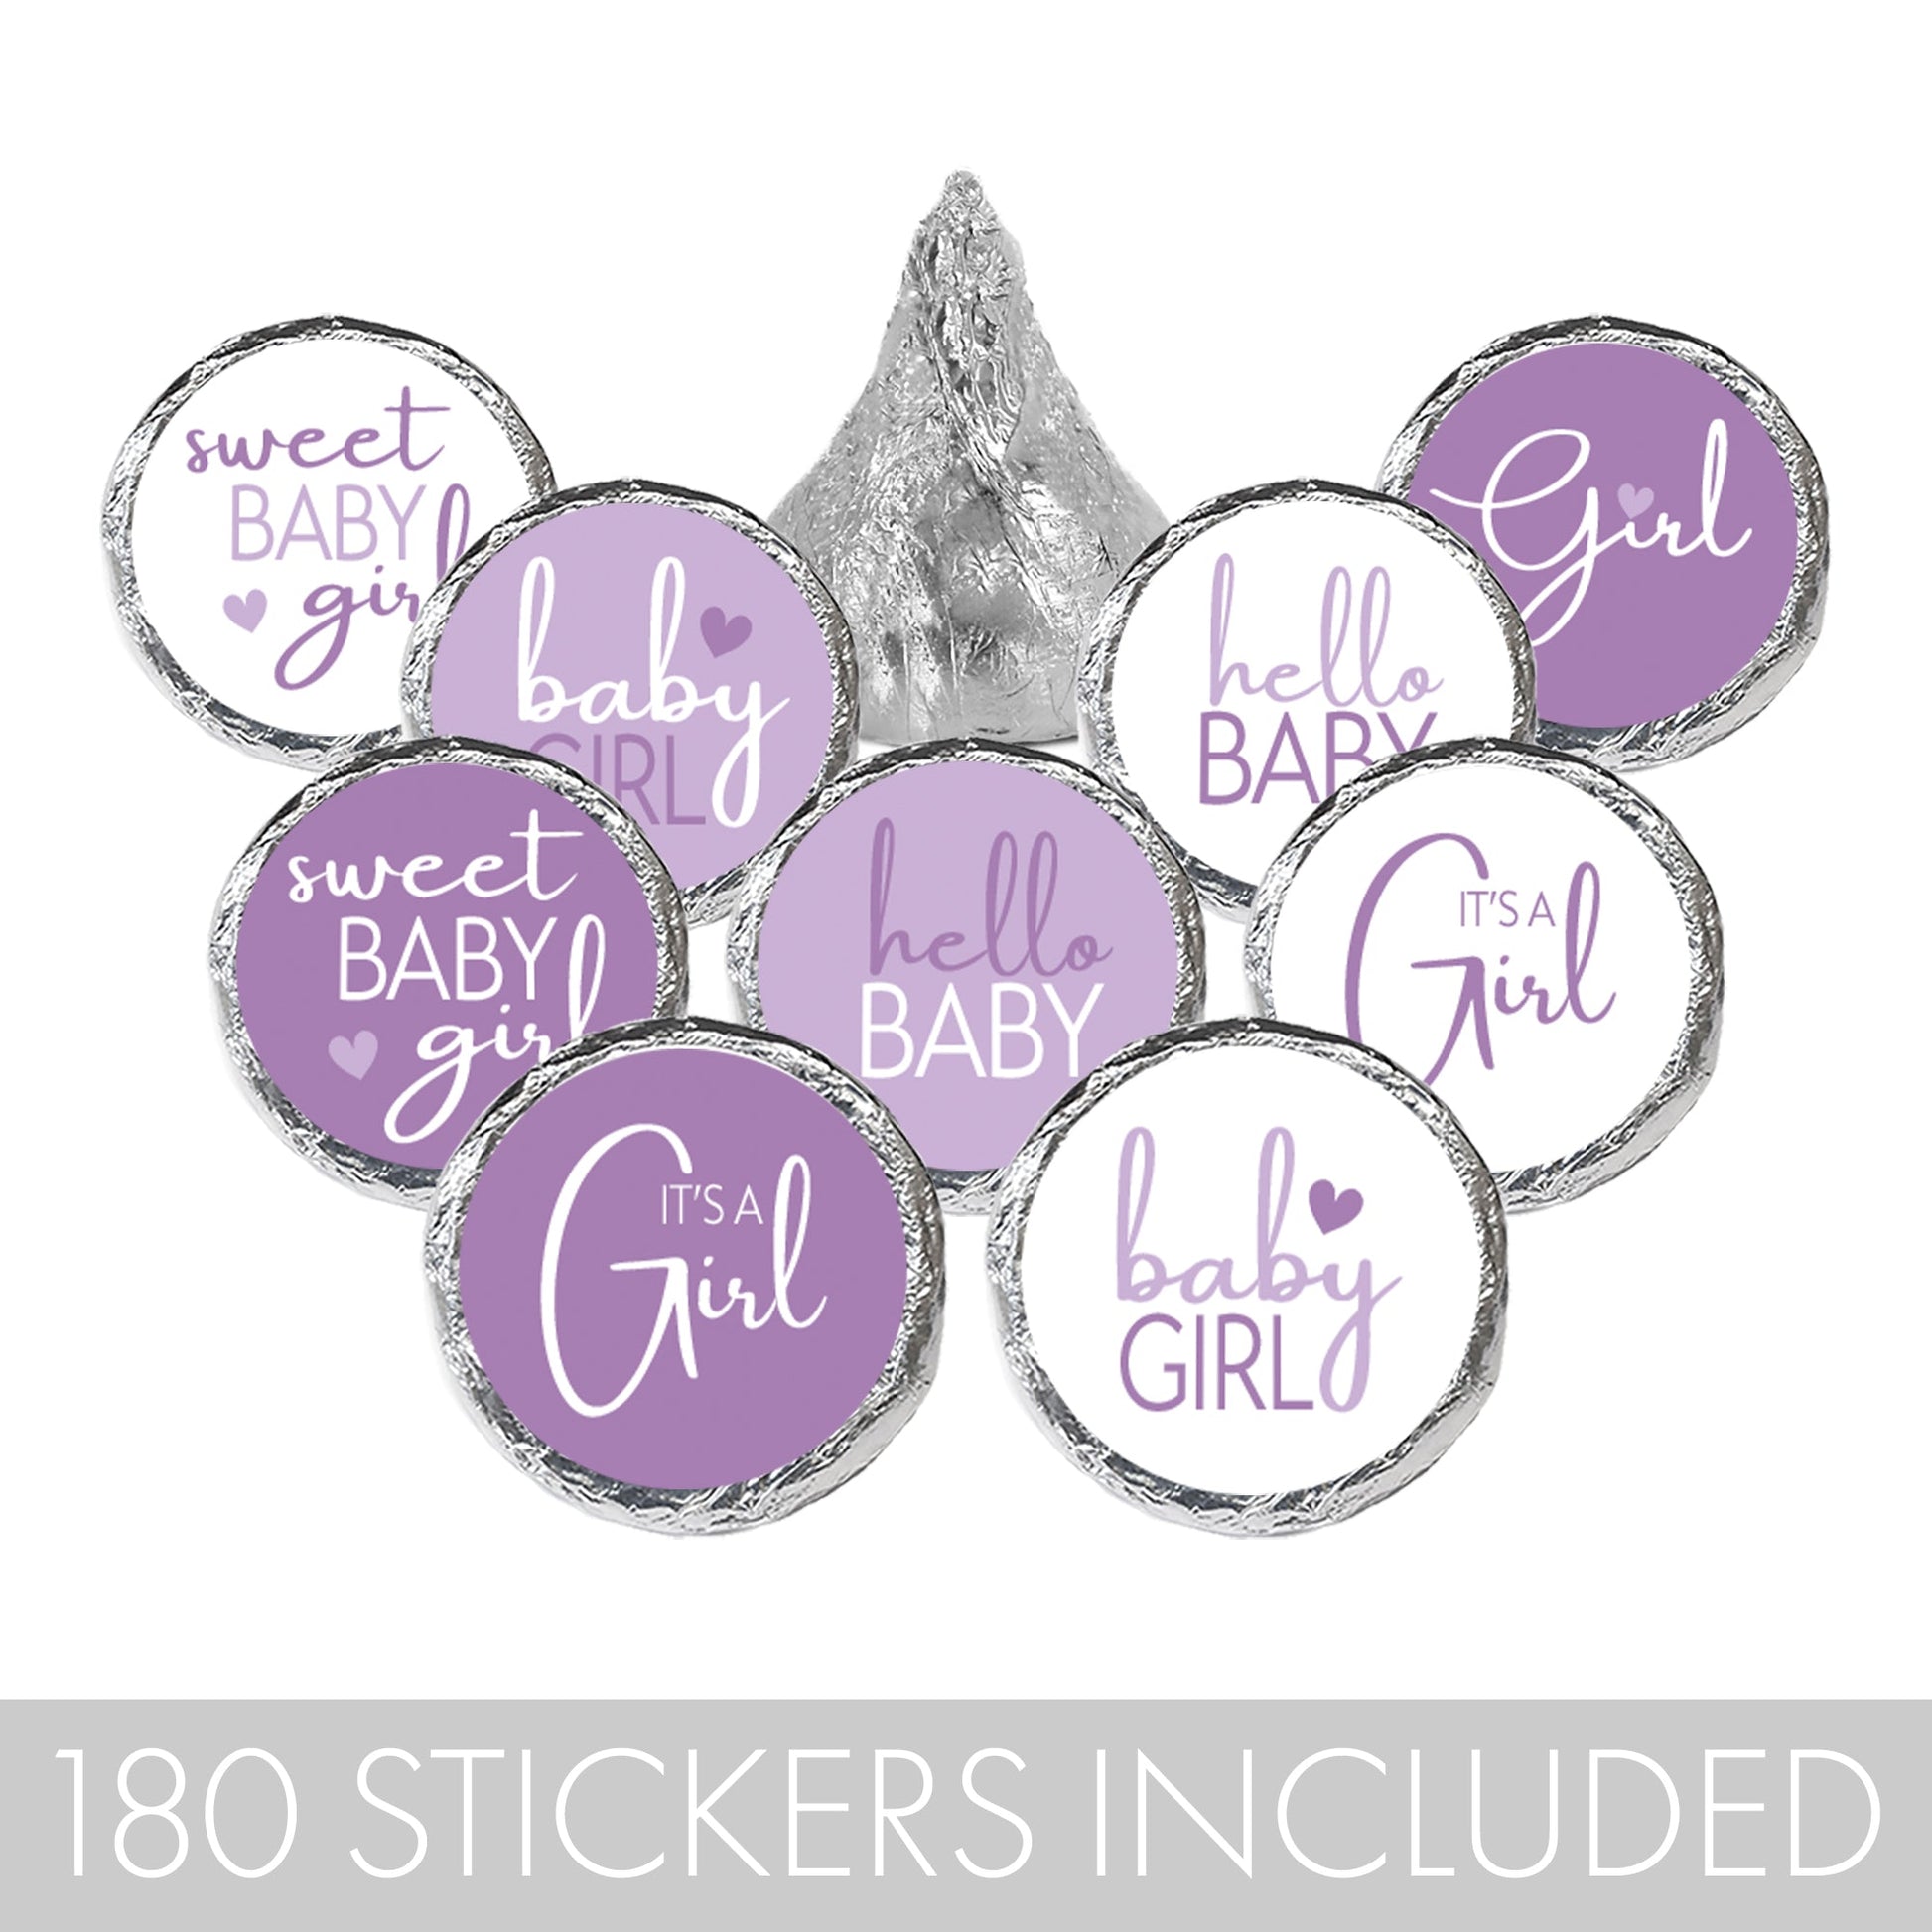 purple 'It's a Girl' stickers for kisses candies